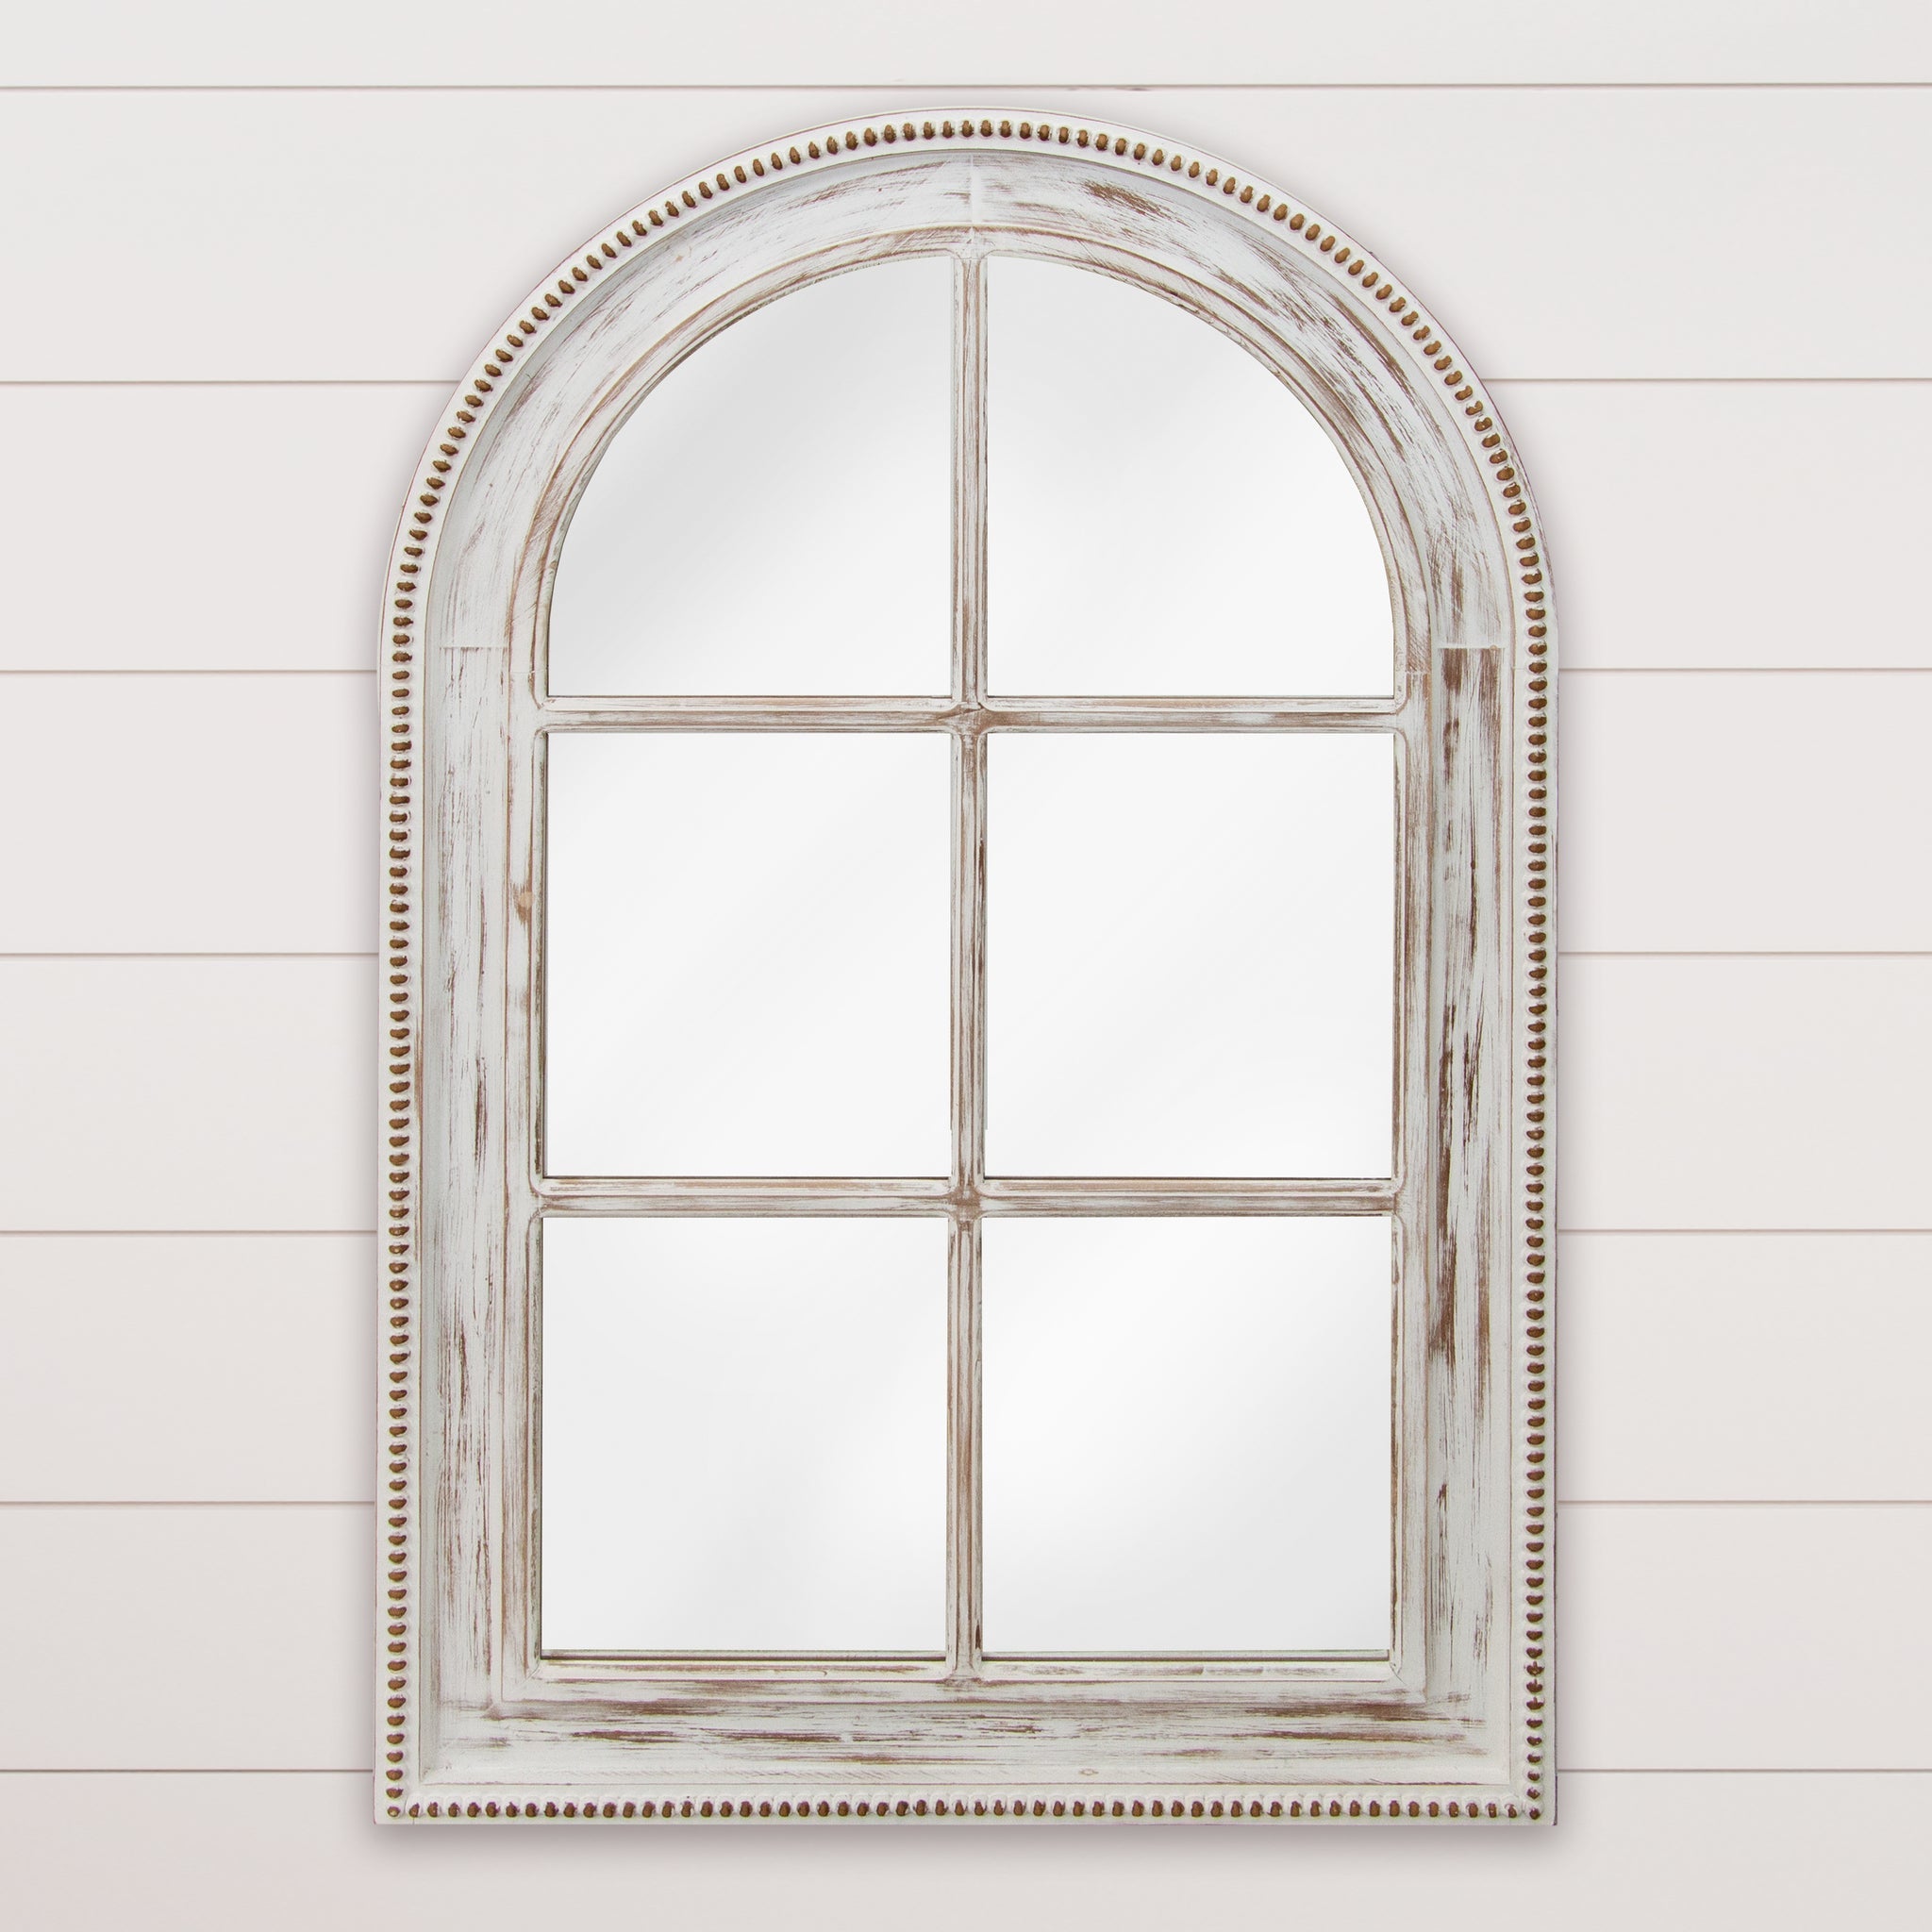 Mirror - Arched Window With Beaded Edge, Lg